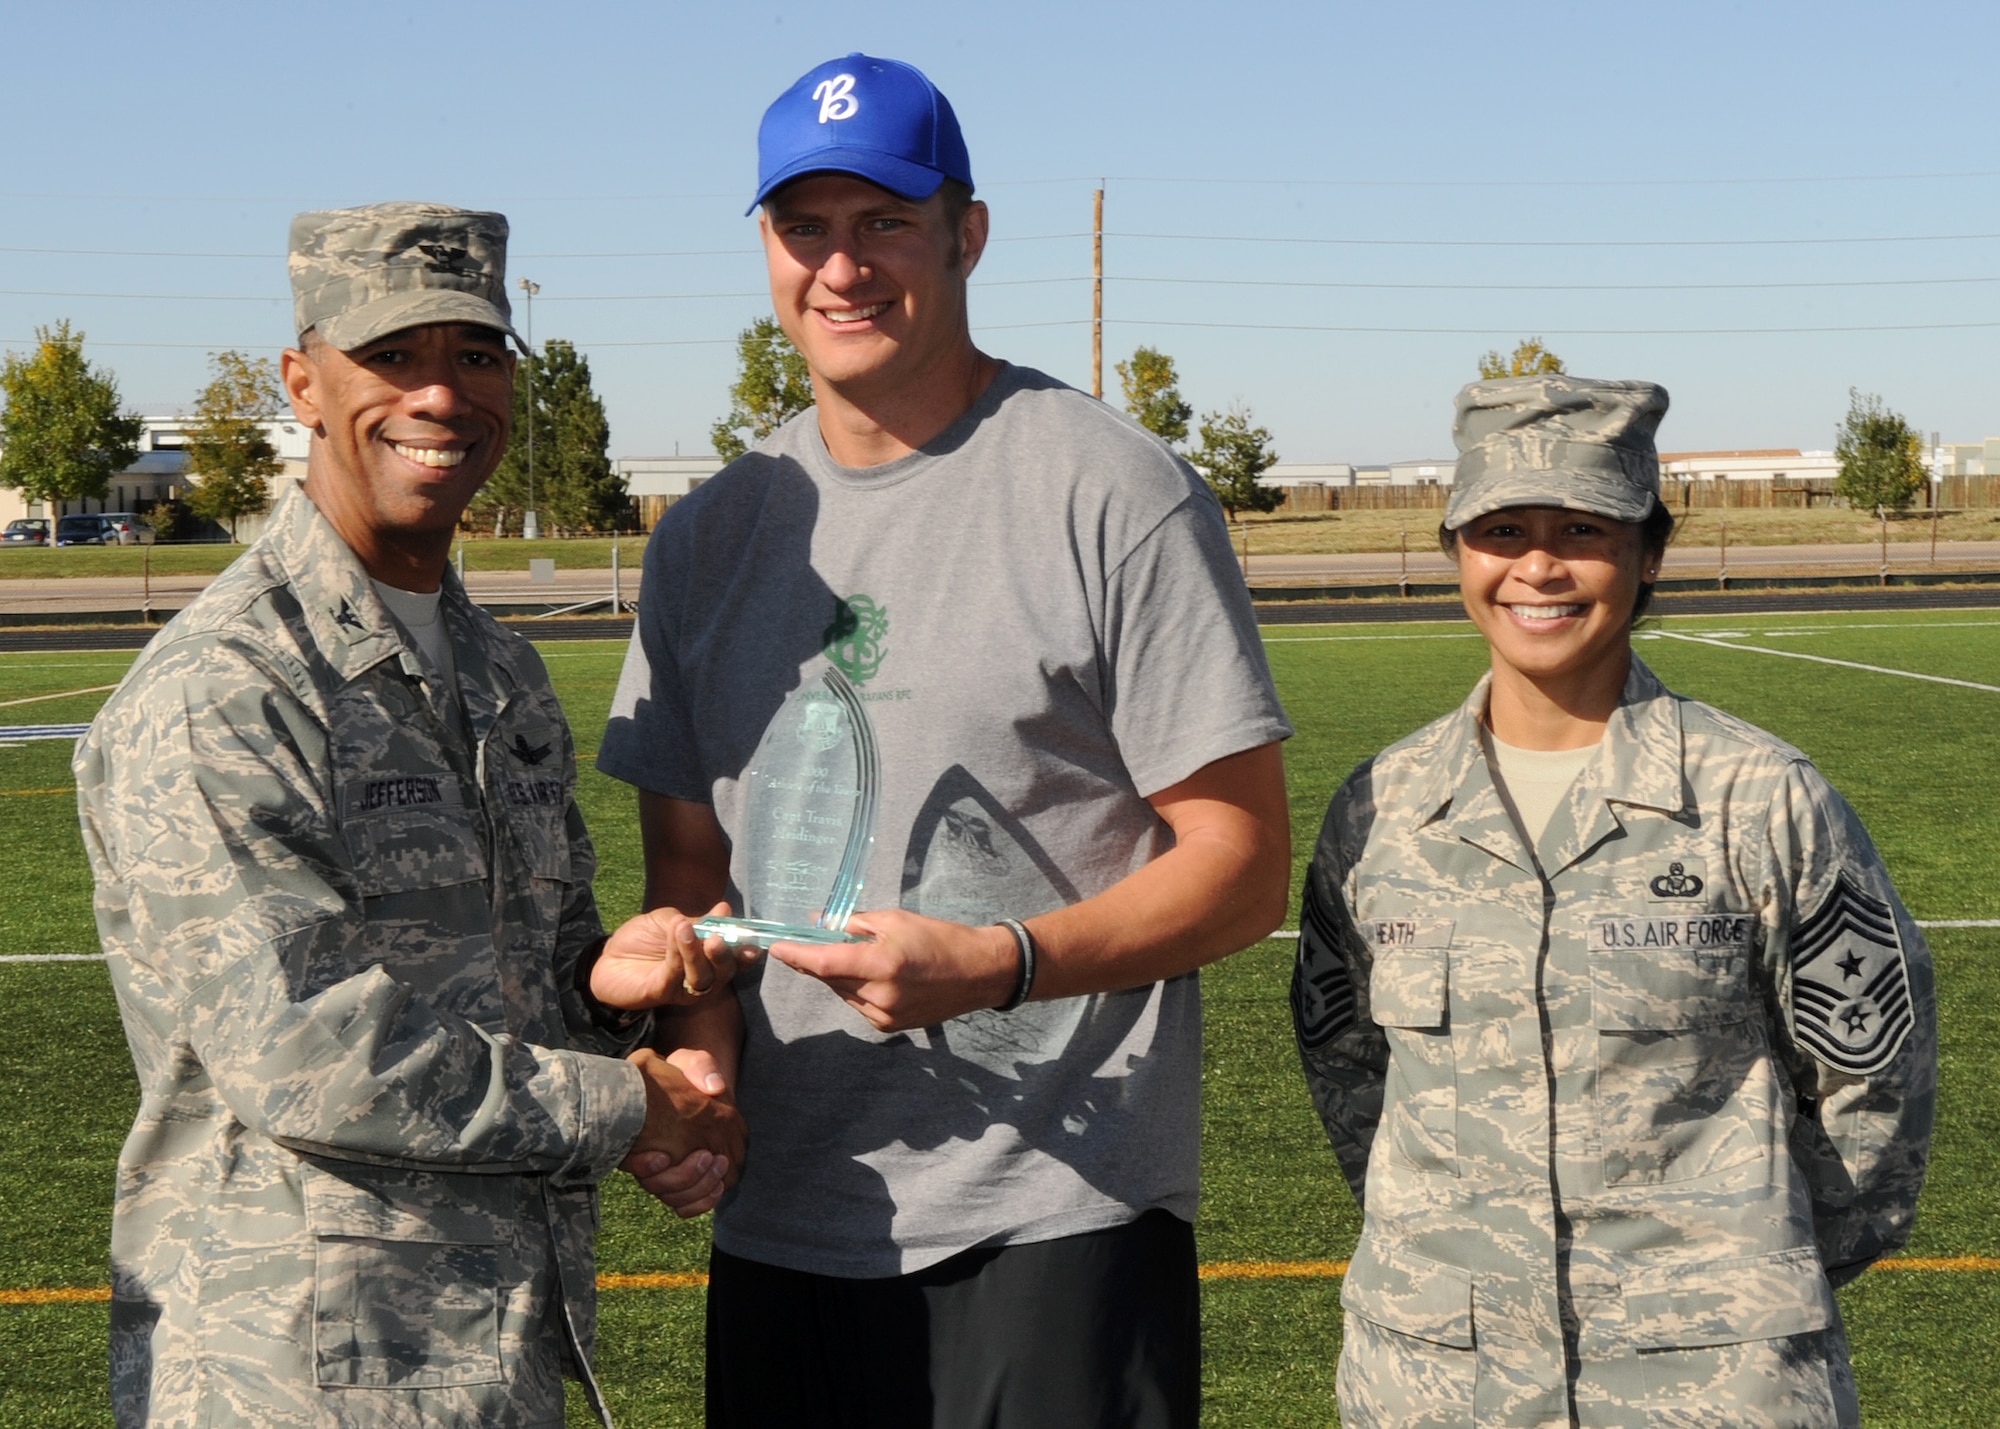 Buckley Air Force Base, Colo. – Col. Vincent Jefferson, 460th Mission Support Group commander, and Chief Master Sergeant Arleen Heath, 460th Space Wing command chief, present Travis Meidinger Buckley’s 2009 Athlete of the Year trophy during the awards ceremony for Buckley’s Sports and Field Day. Meidinger will now compete for Air Force Space Command Athlete of the Year. (U. S. Air Force photo by Senior Airman John Easterling)